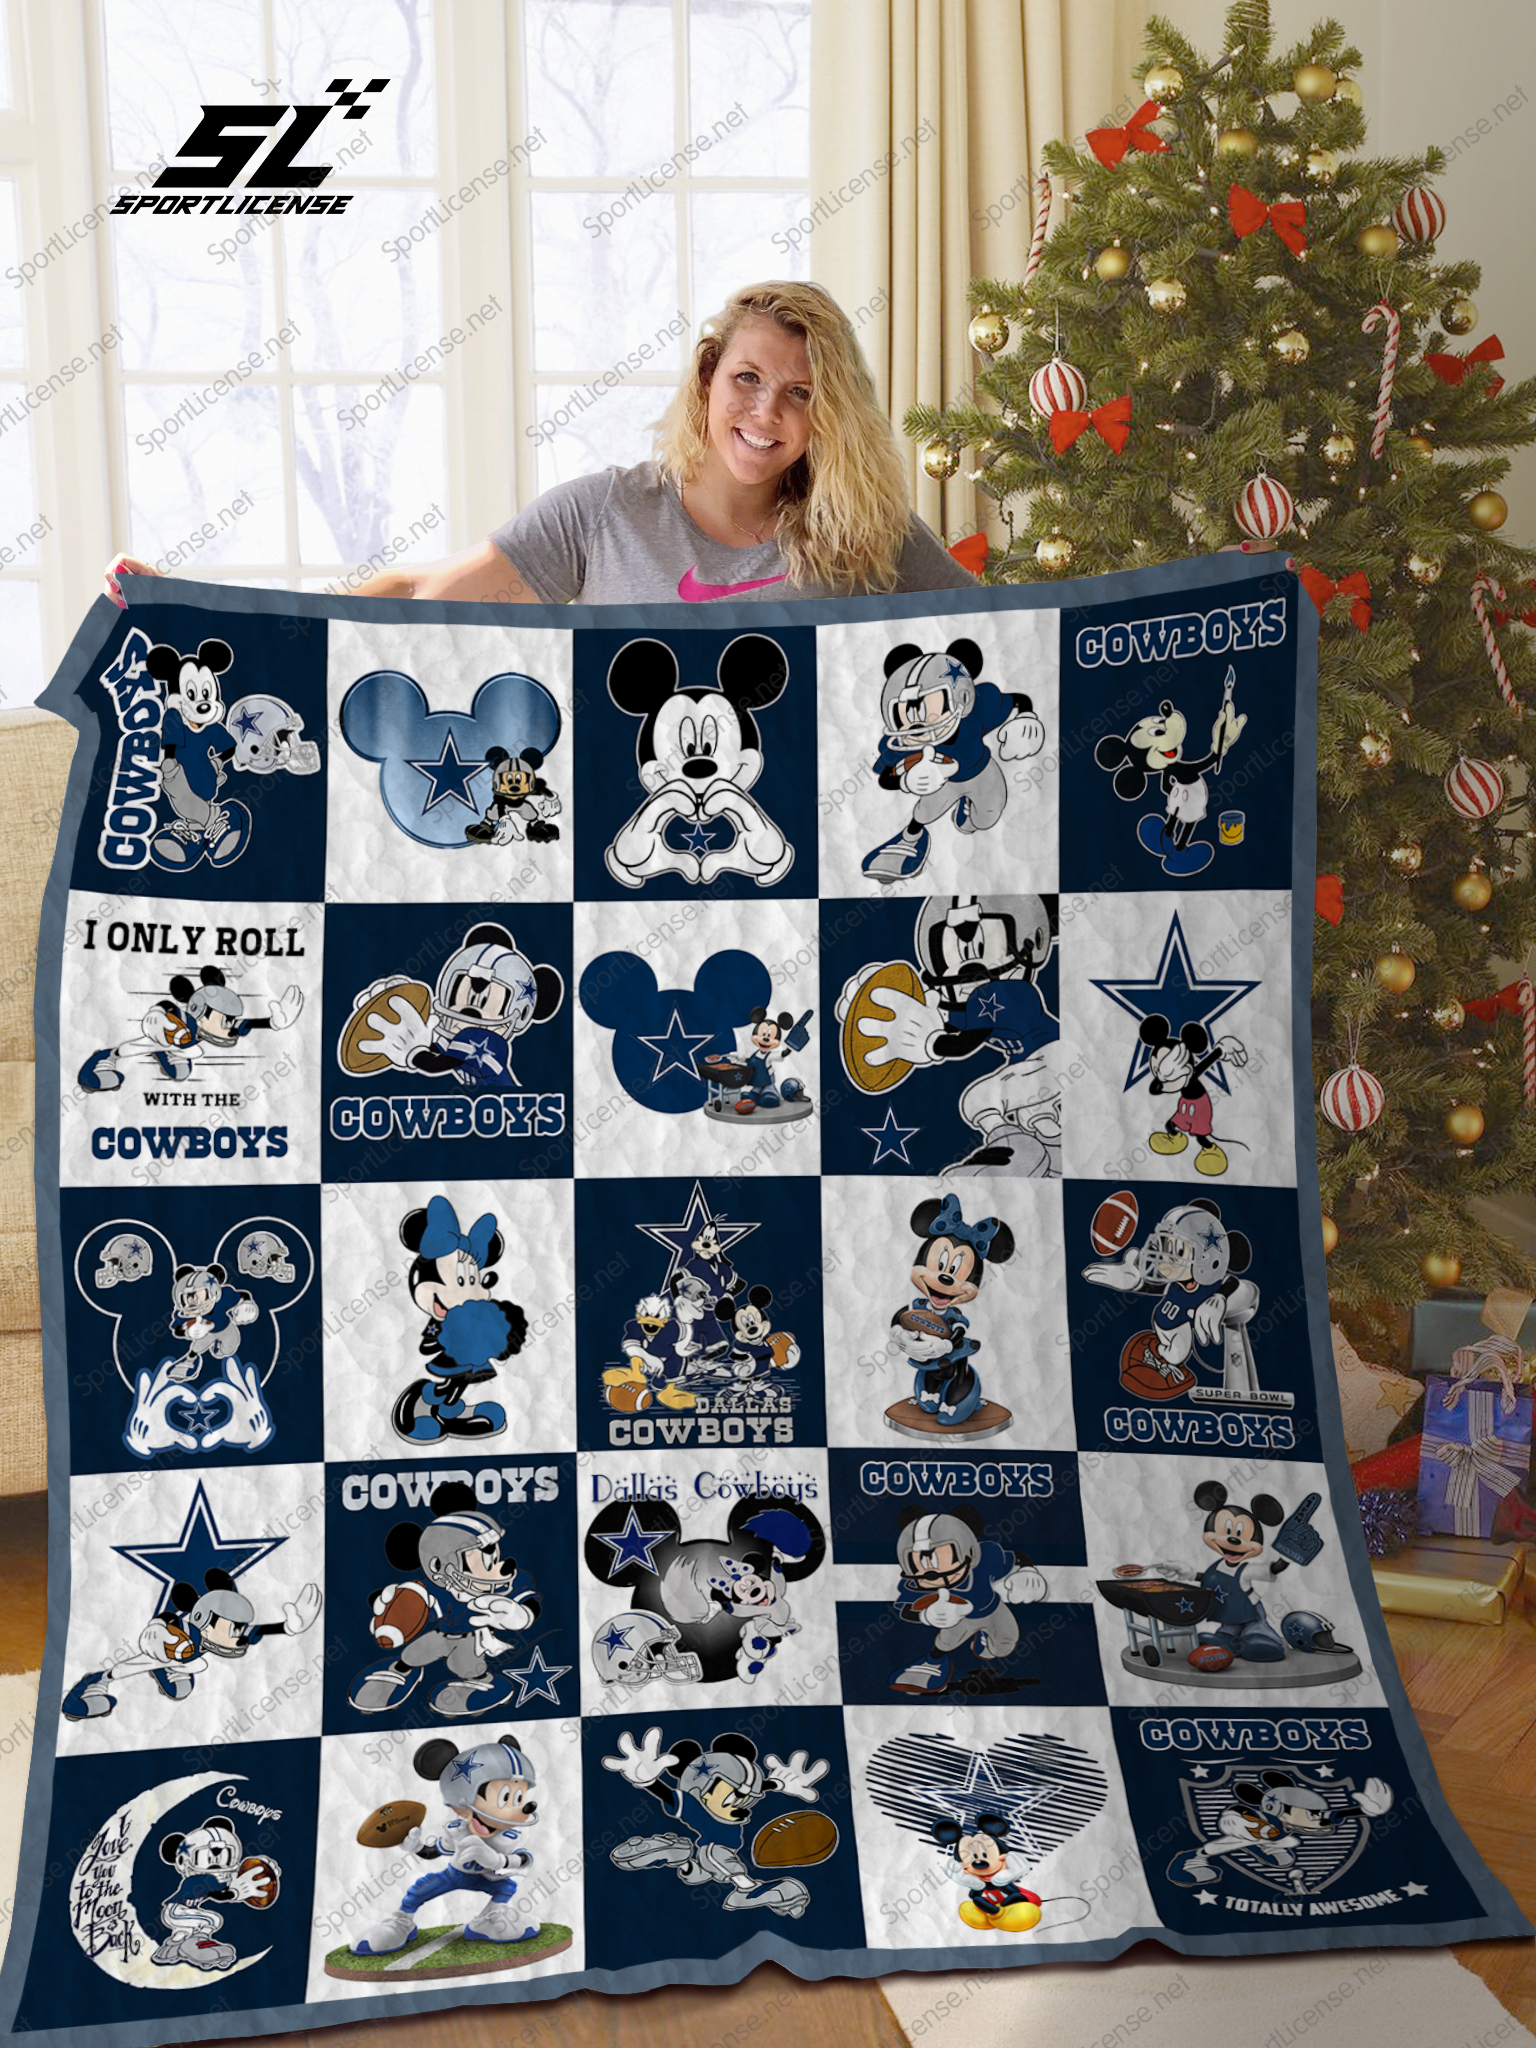 Mickey mouse dallas cowboys nfl quilt 1